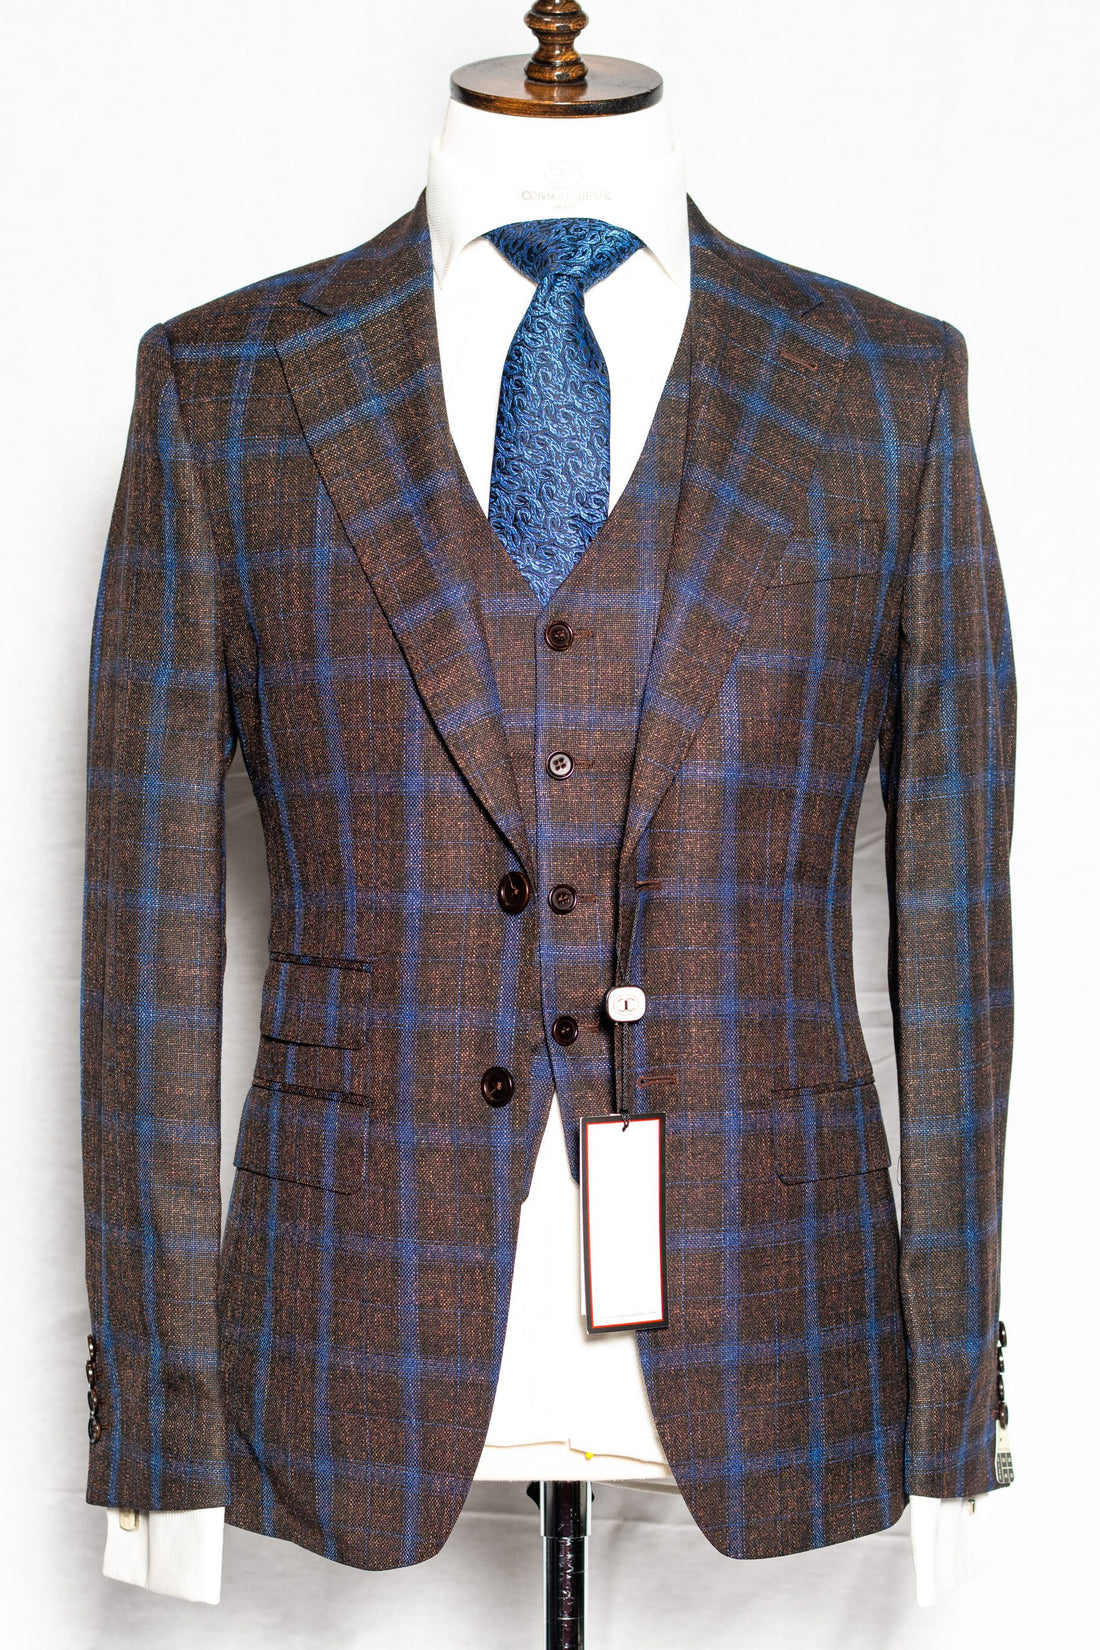 Loro Piana - Brown with blue window pane plaid tweed 3-piece slim fit suit with V vest